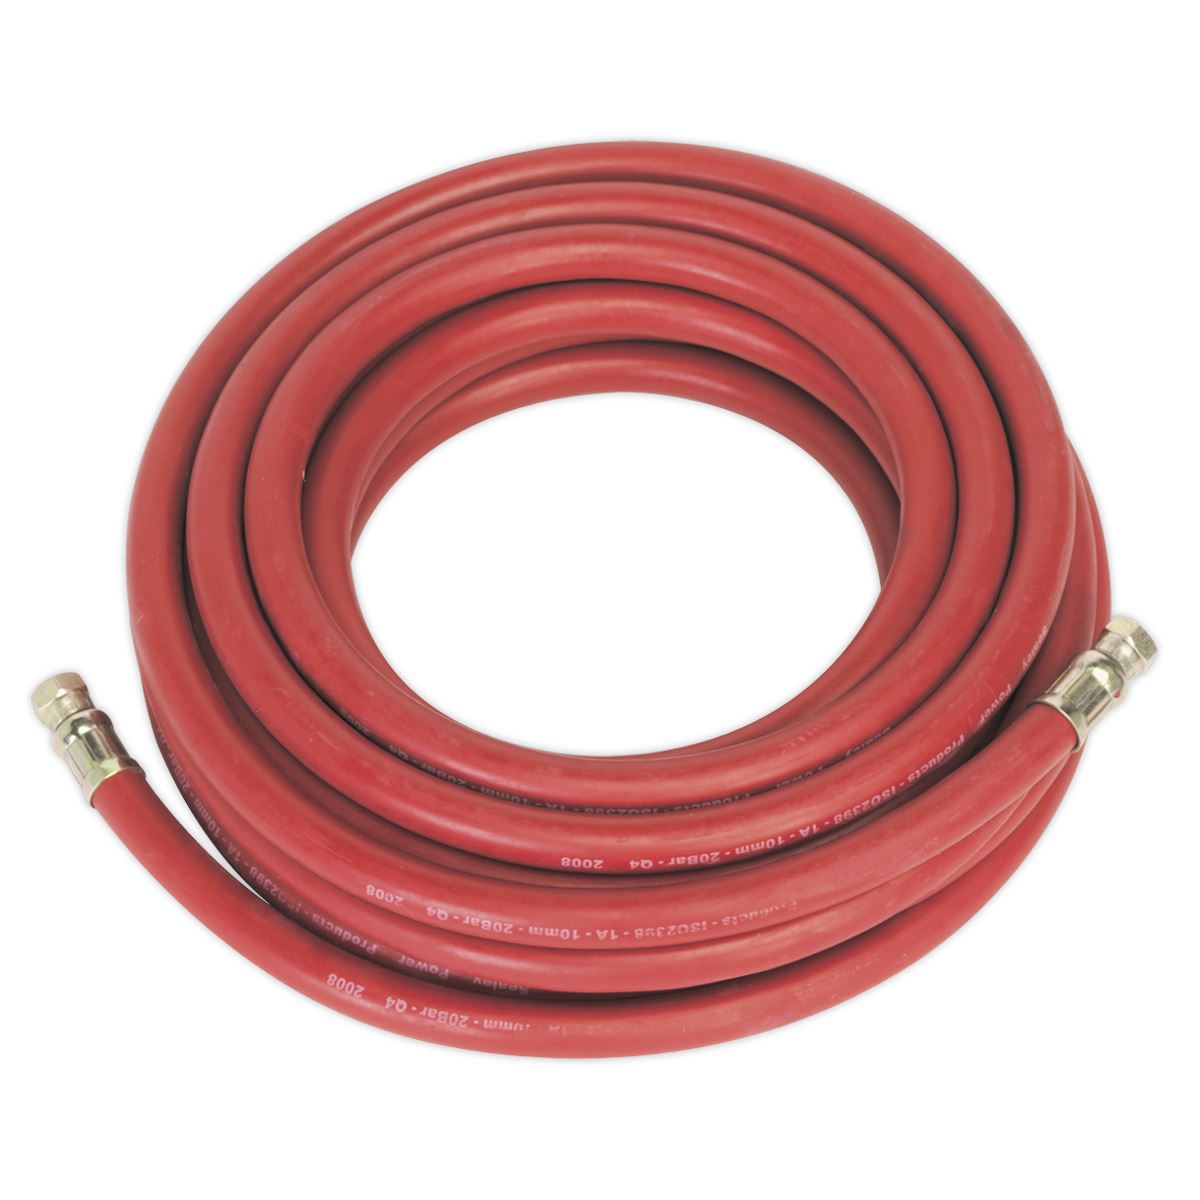 Sealey Air Hose 10m x Ø10mm with 1/4"BSP Unions